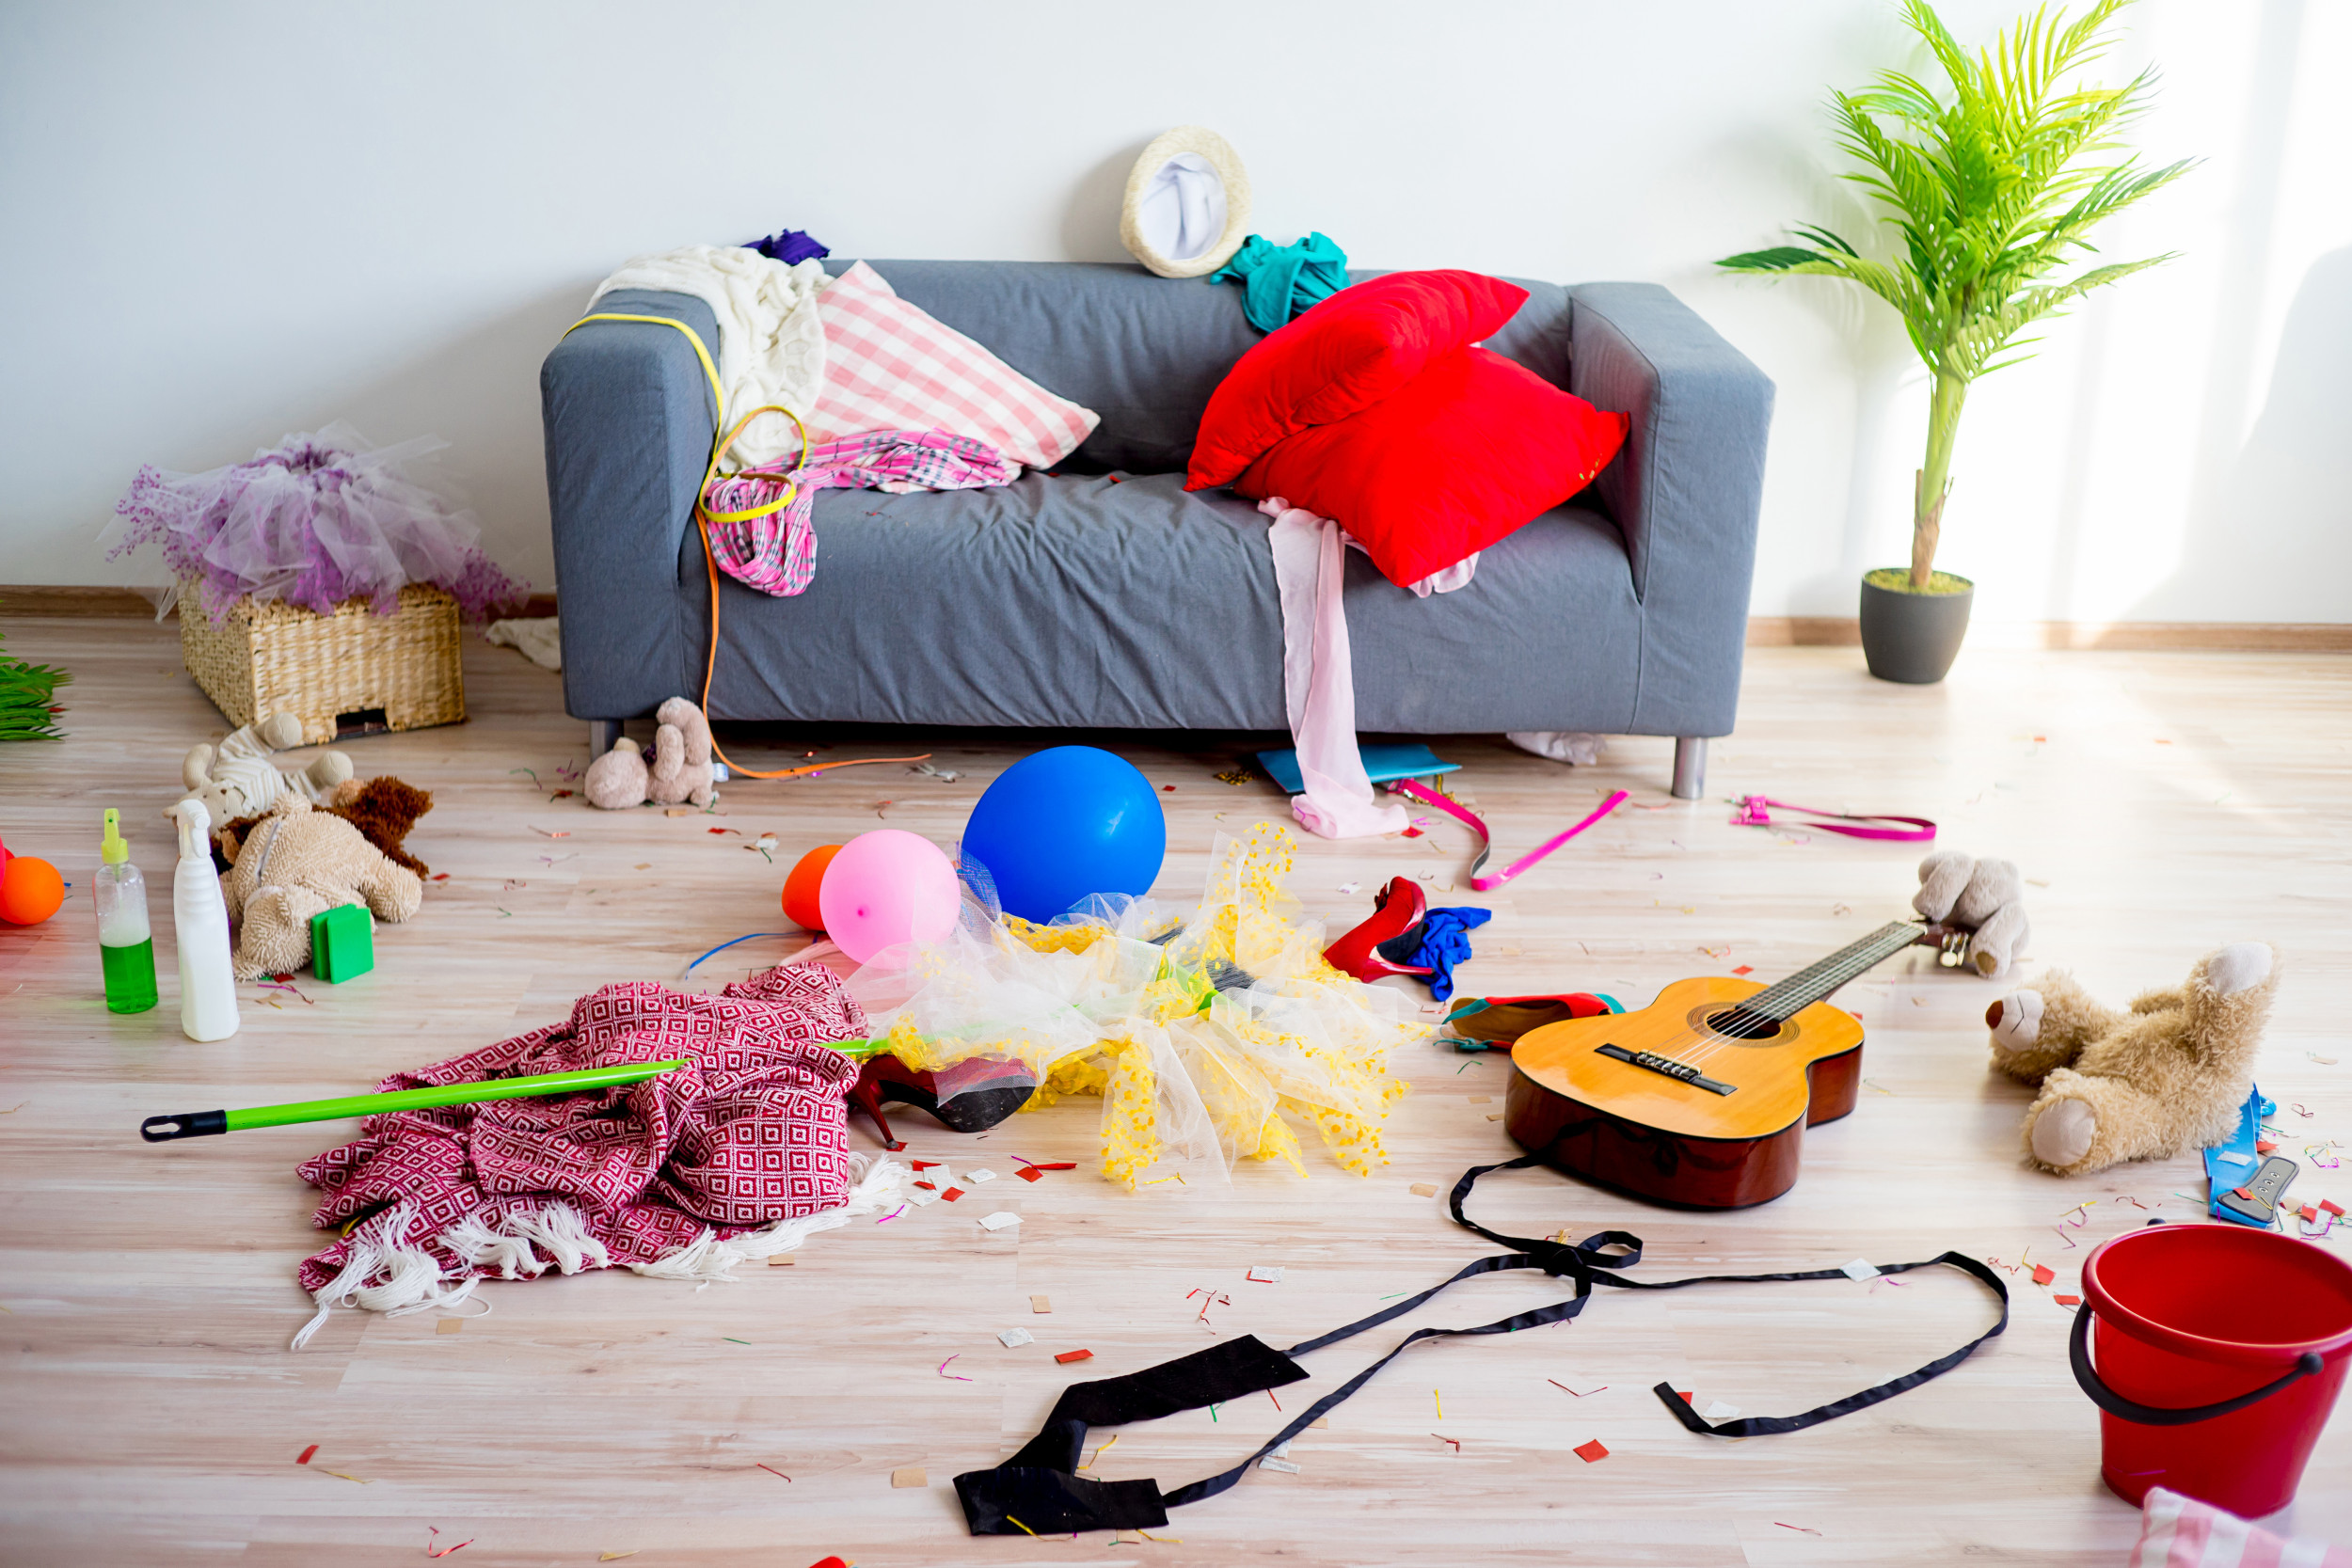 Kid Messy From Kitchen To Living Room